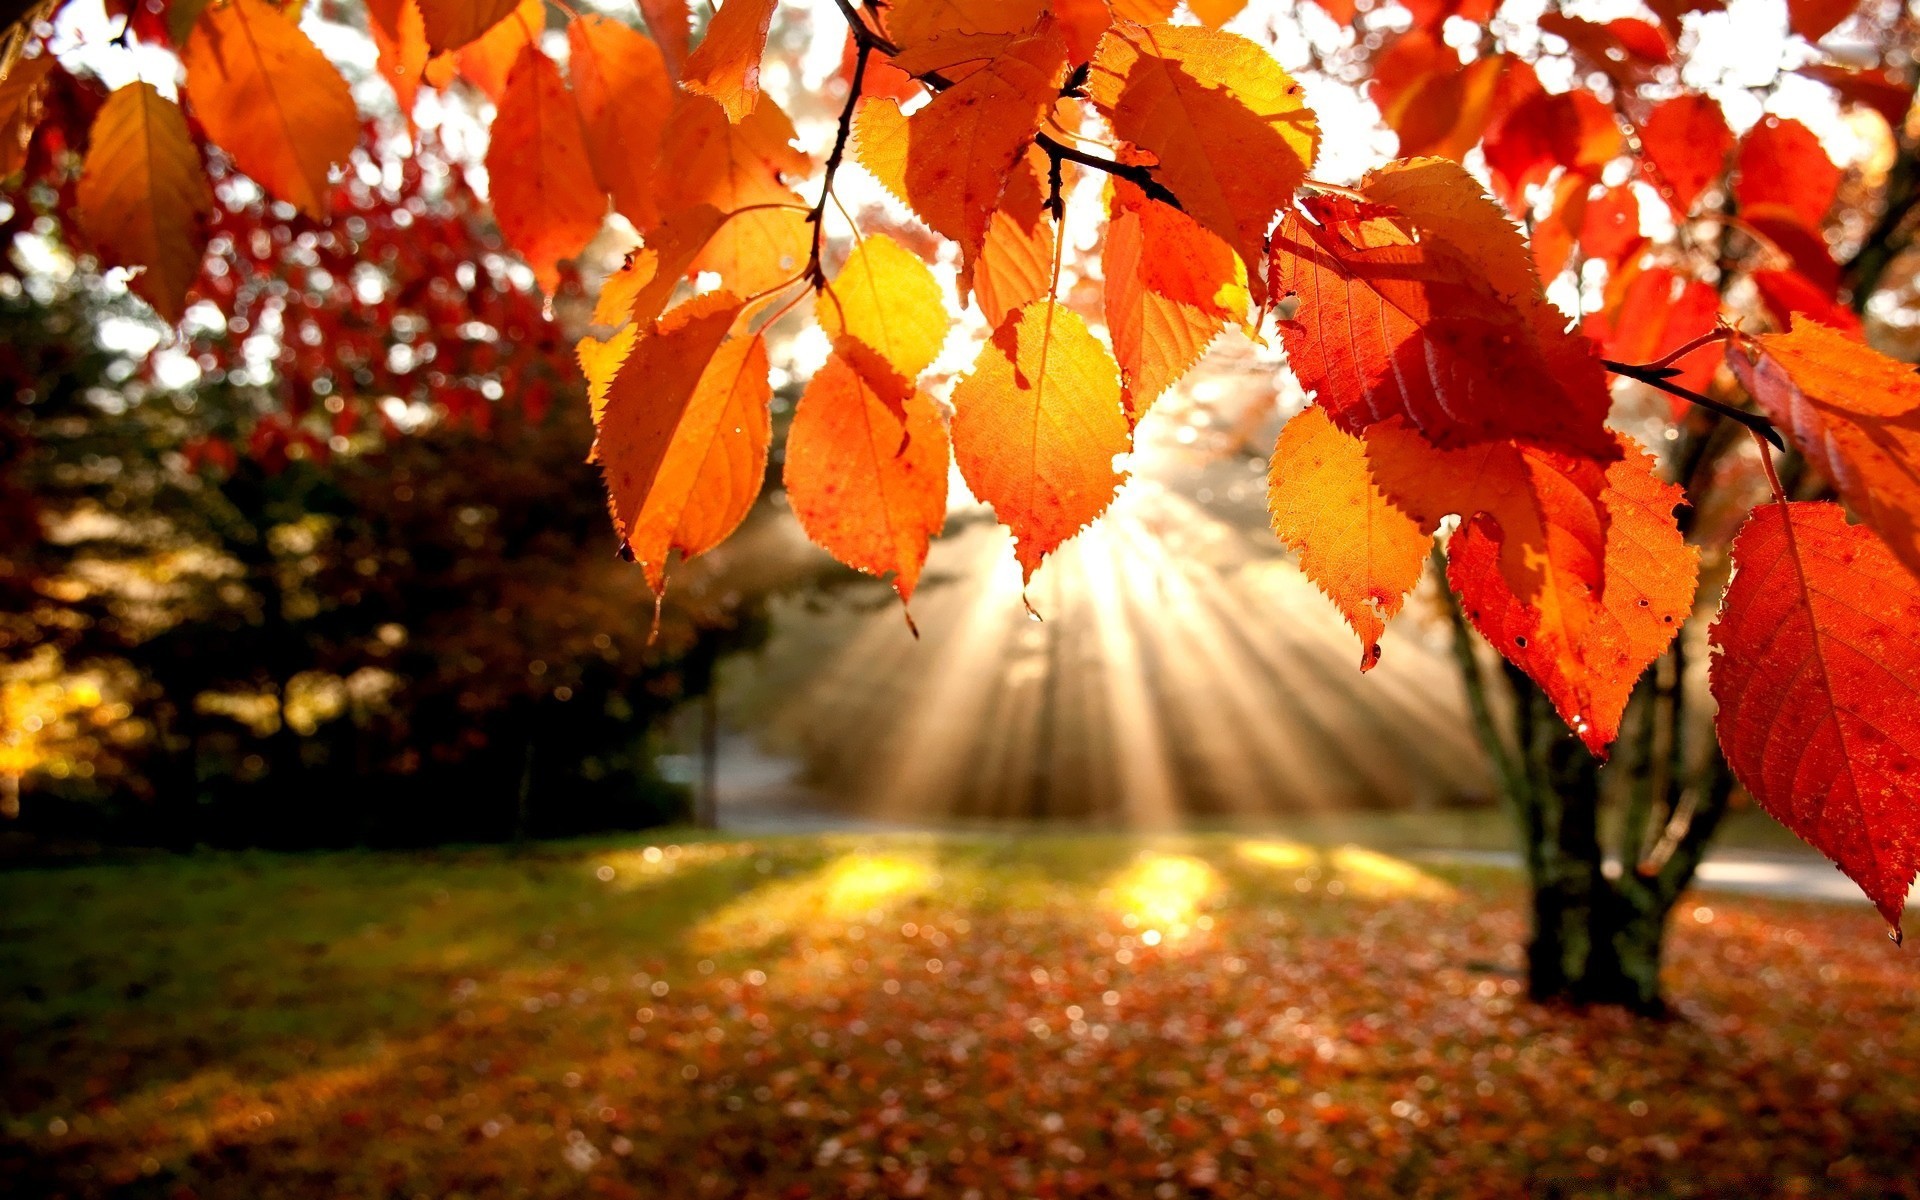 The rays of the sun in the autumn tree wallpaper